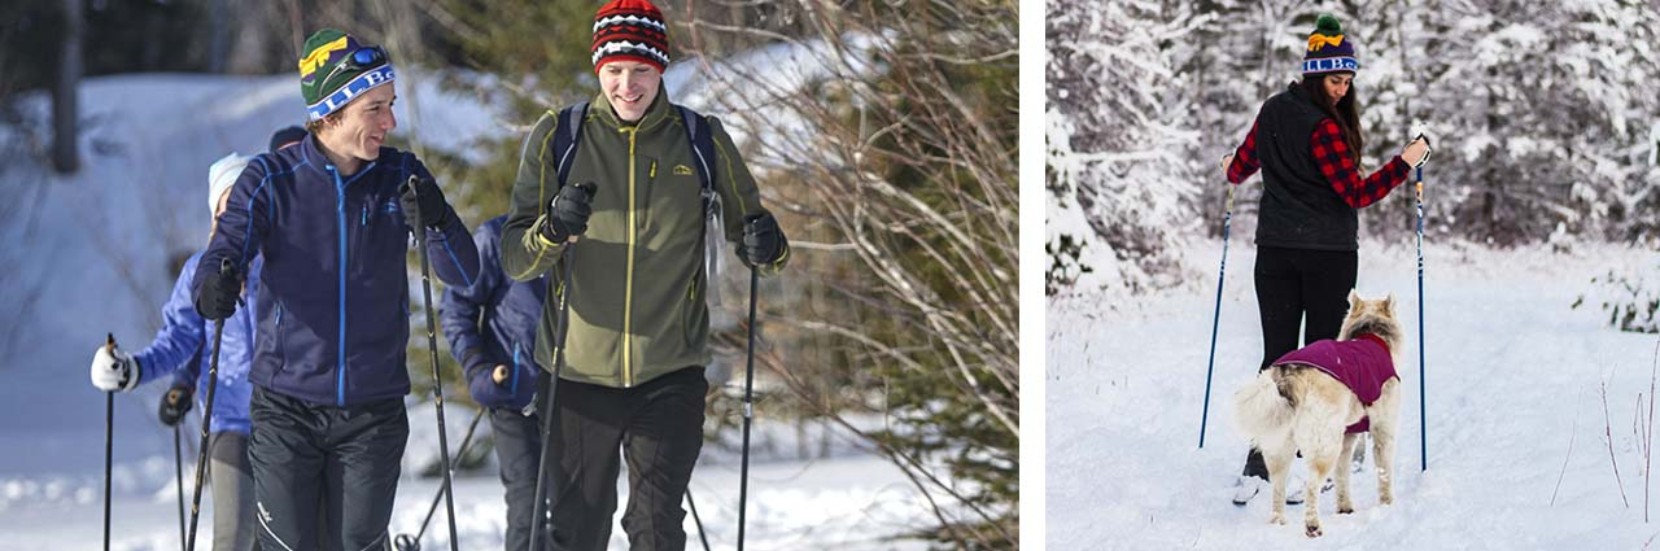 Family cross-country skiing and woman cross-country skiing with dog.